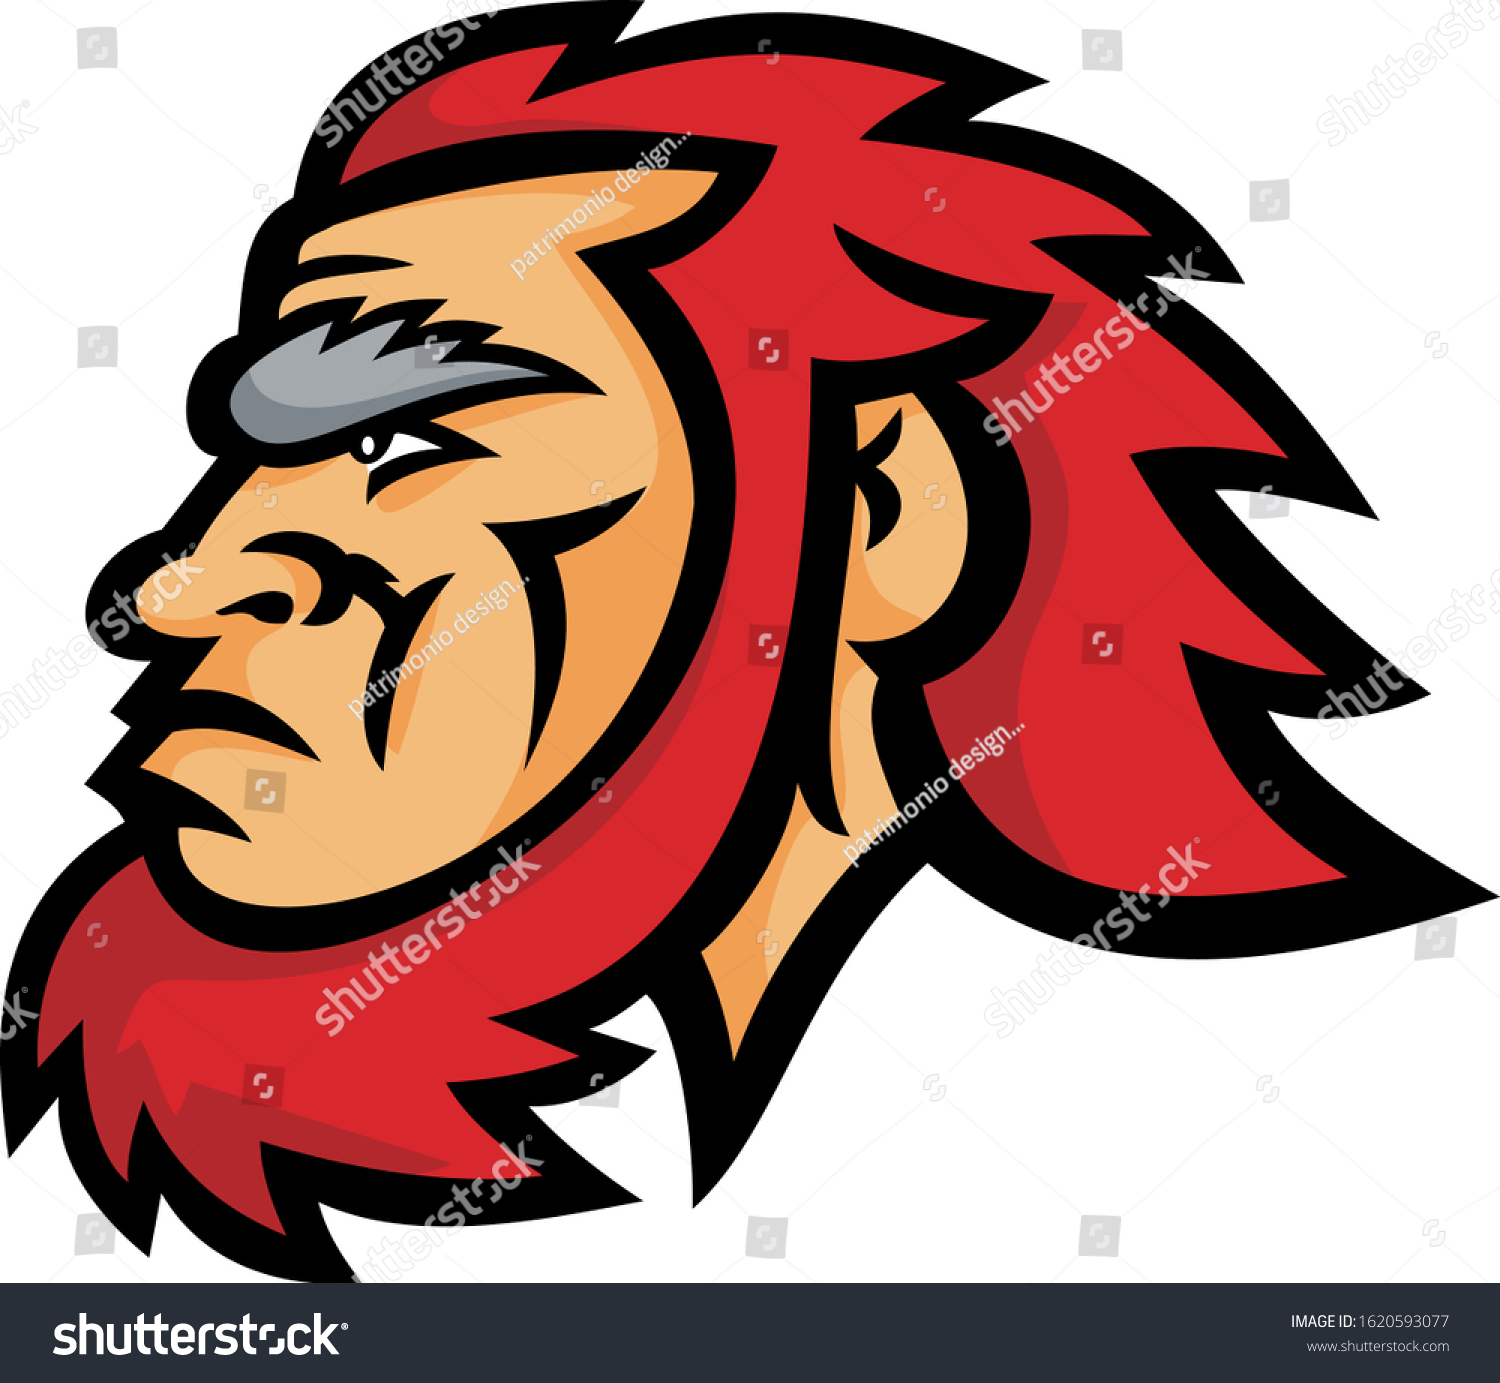 SVG of Mascot icon illustration of head of a primitive caveman, Cro-Magnon or Neanderthal, an extinct species of archaic humans   viewed from side on isolated background in retro style. svg